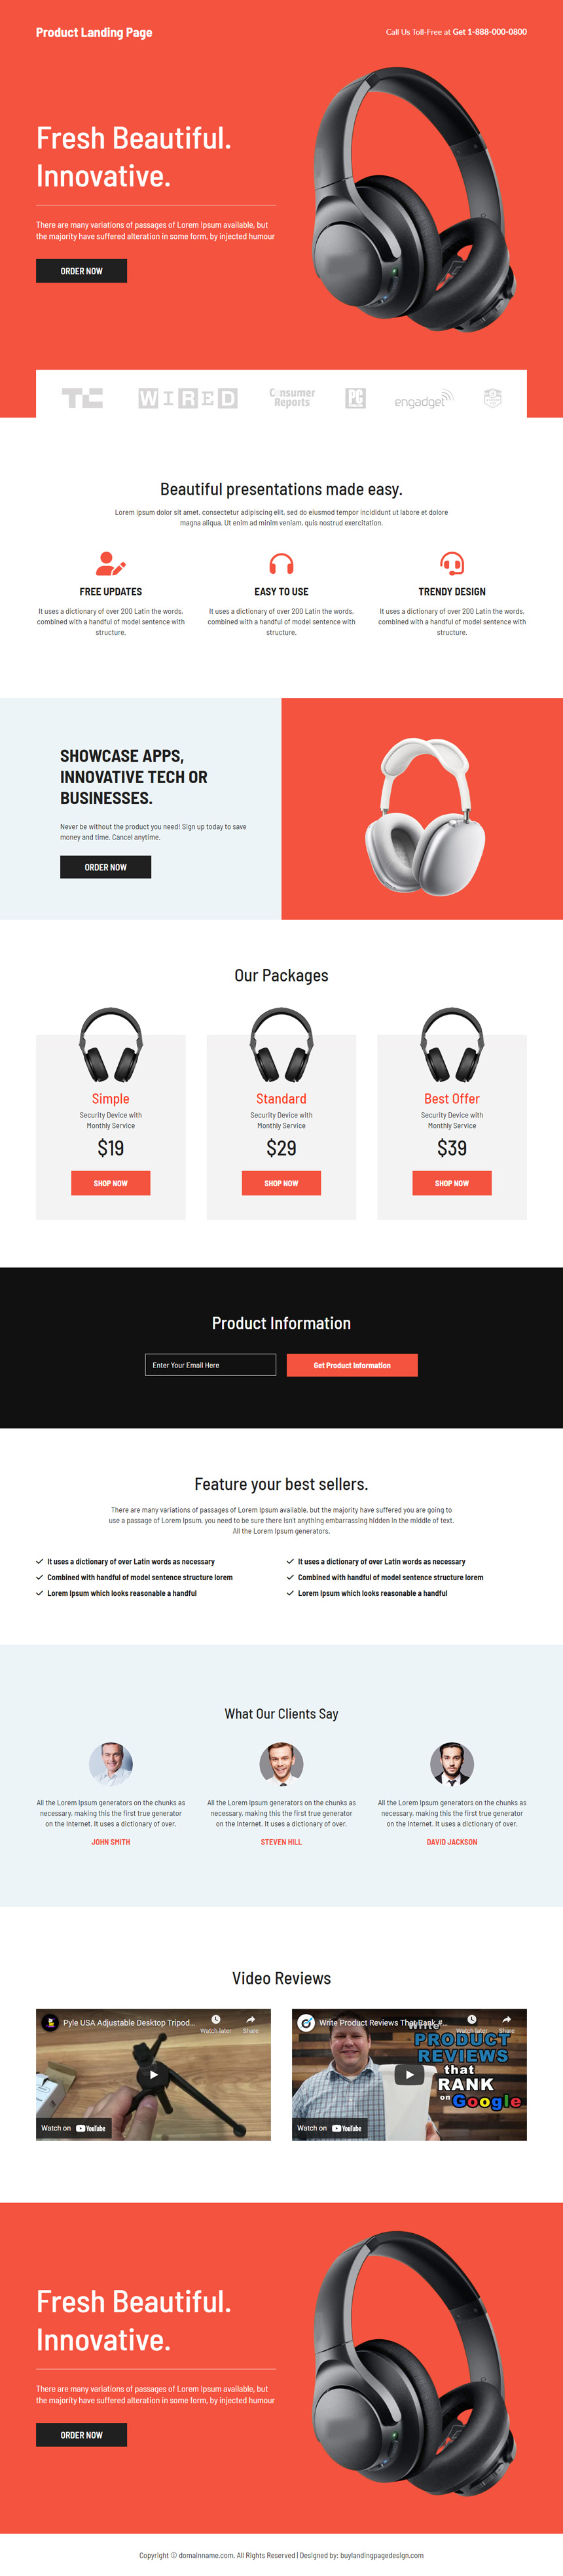 product selling responsive ecommerce landing page design